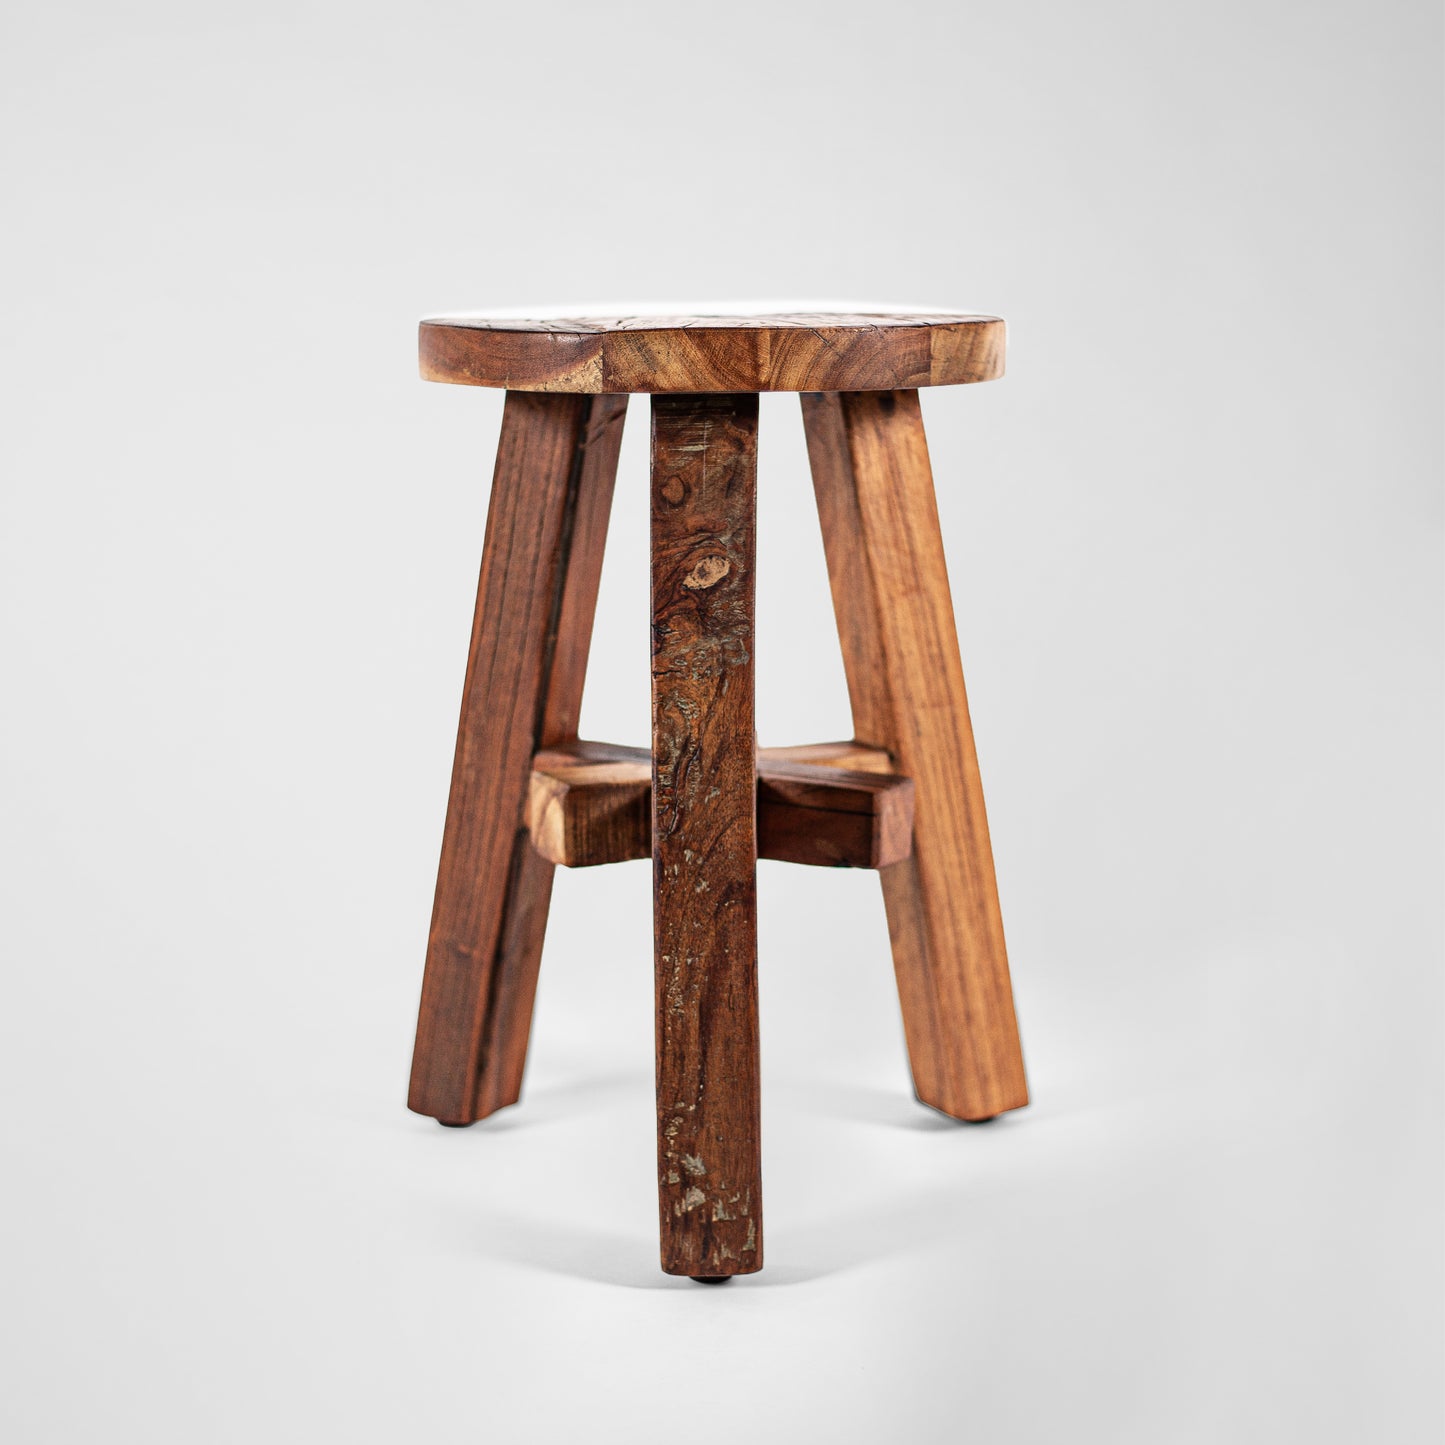 Willy Wonder – country house design stool made of wood